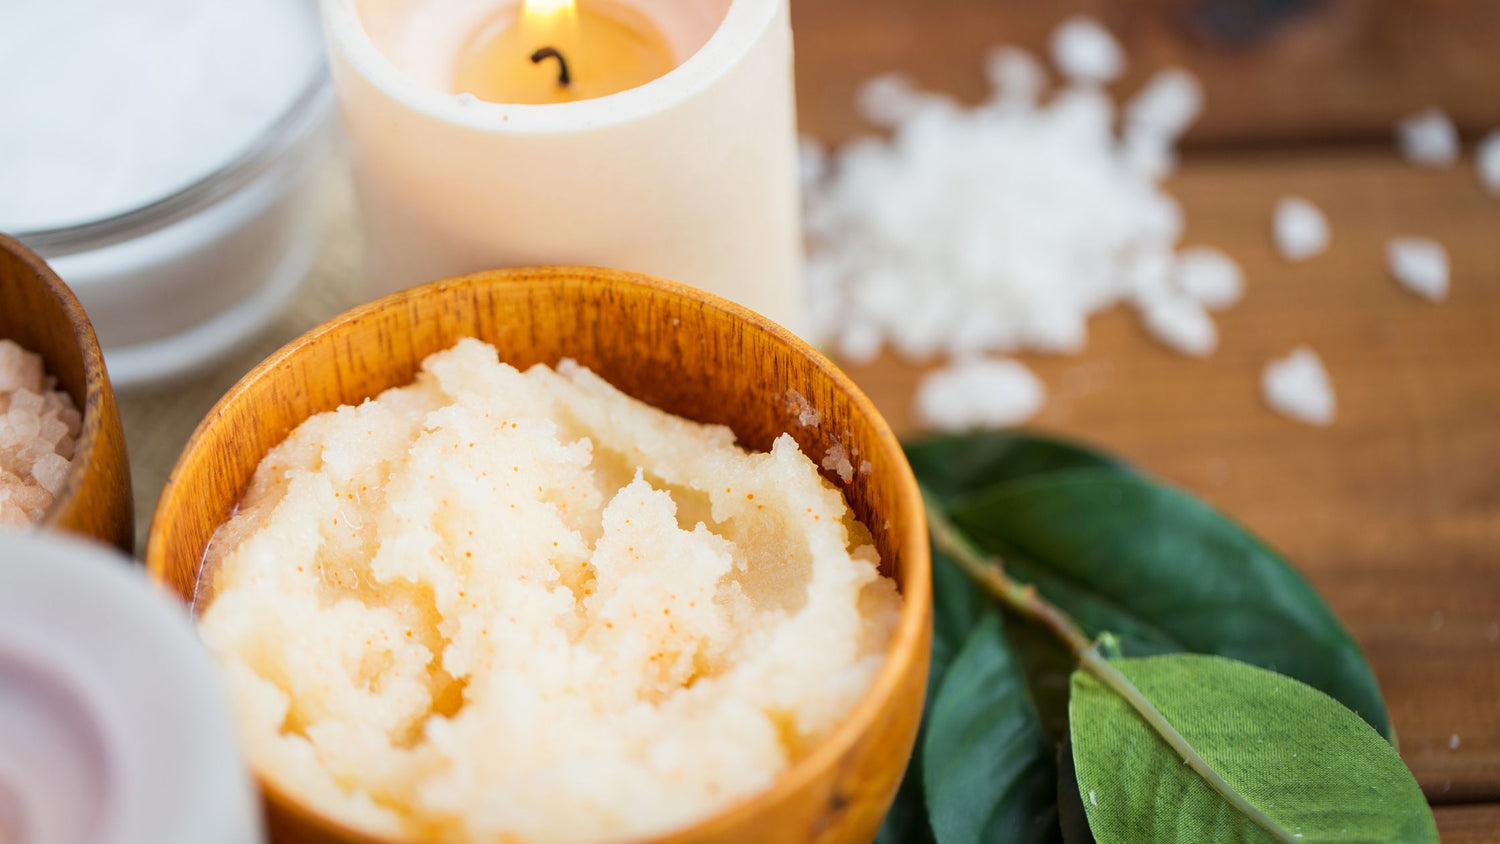 Body Scrub vs Body Wash - Which Is Best For You?